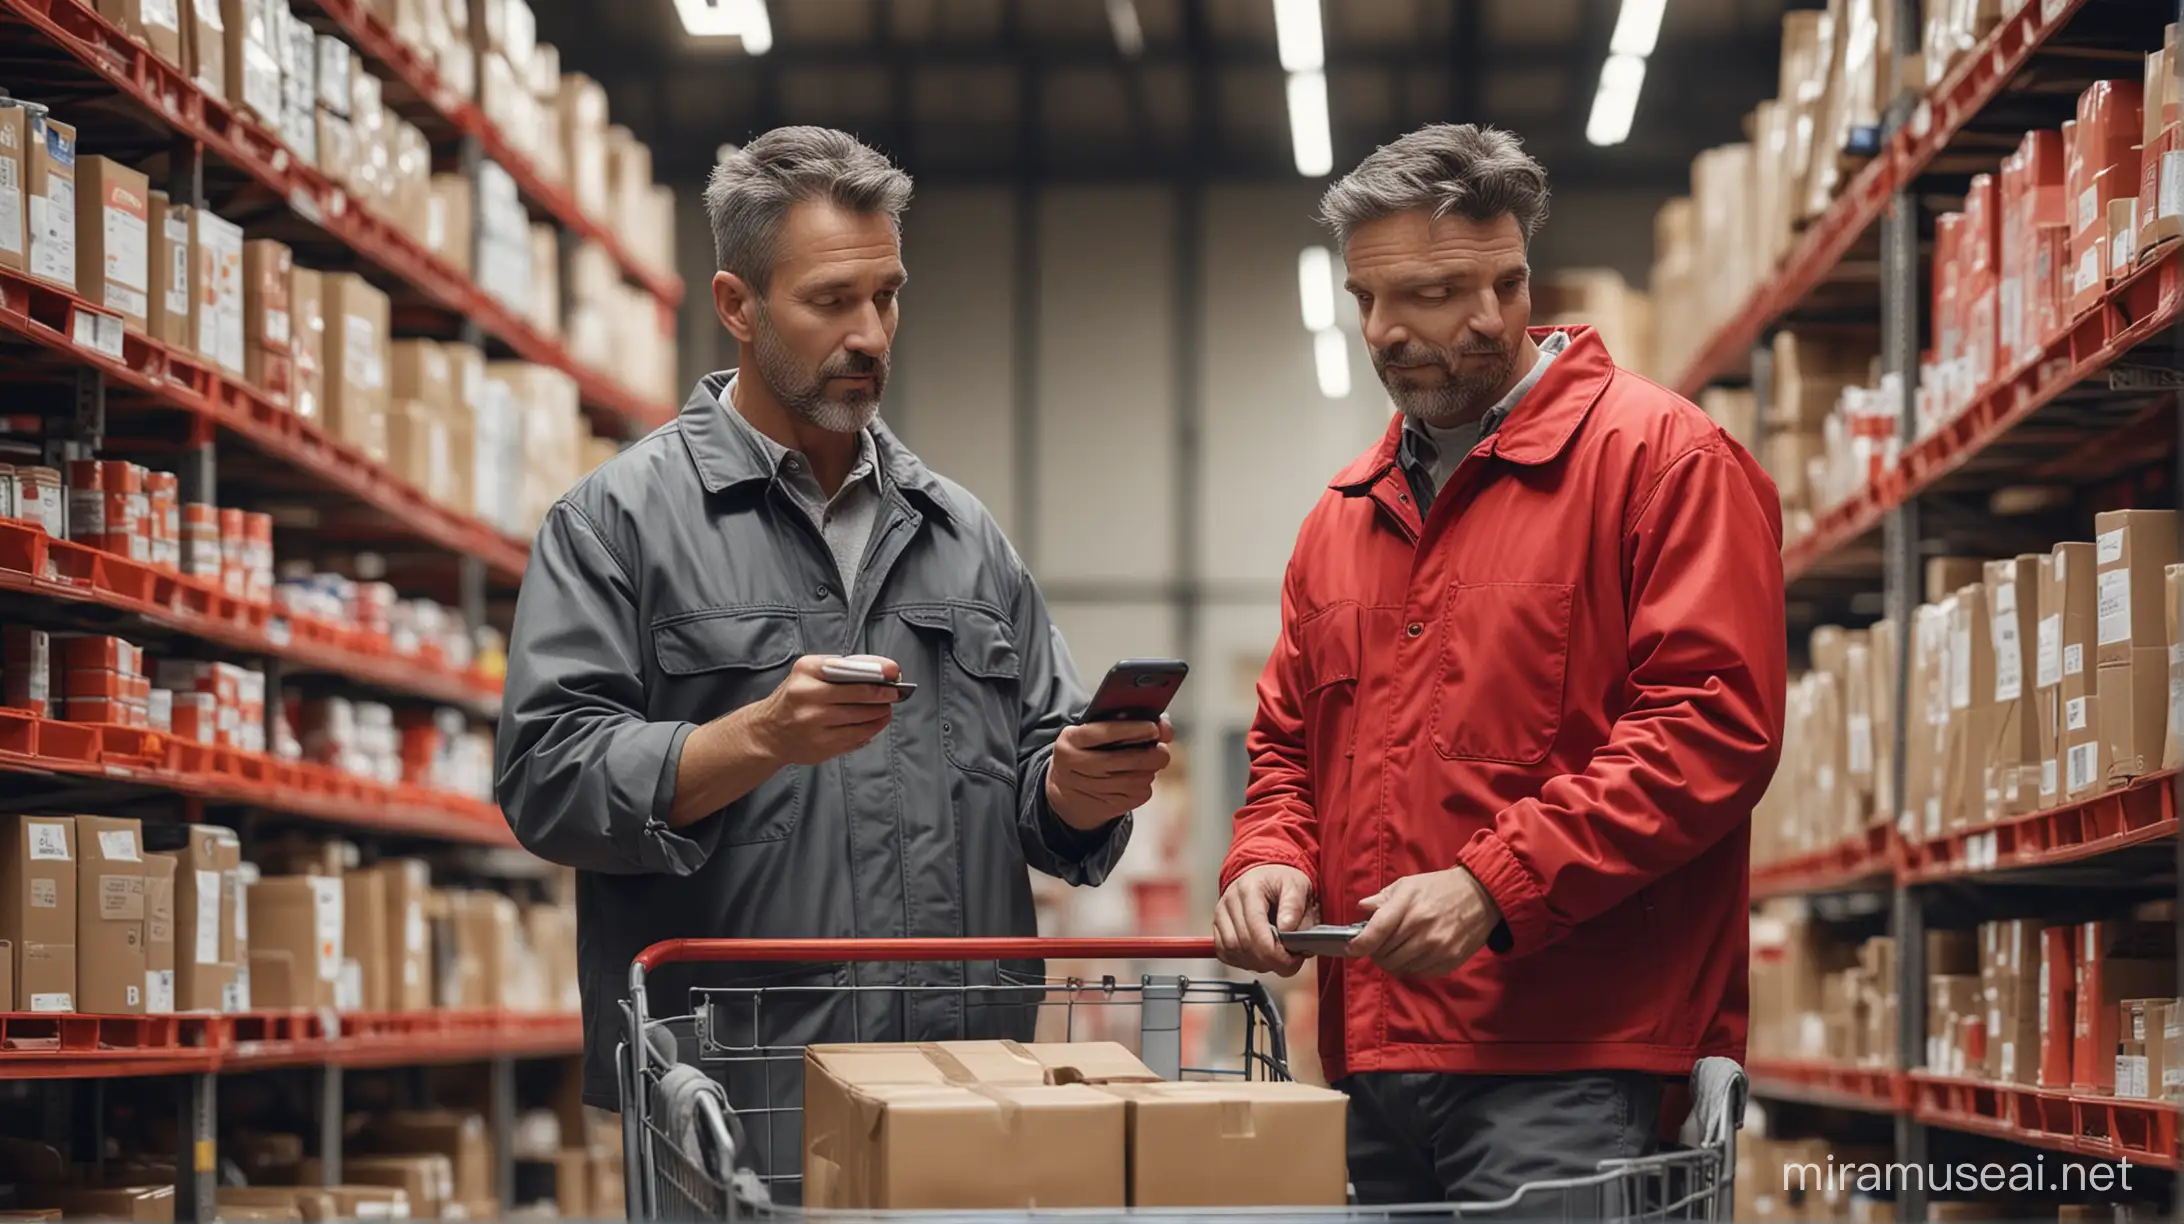 middle aged retail worker dressed in red, in the back of a warehouse holding a pda and looking at various products in a cart. Next to the worker there is a middle aged man dressed in grey utility clothes looking at the same products. Bokeh, photorealistic, intricately detailed, film, grain, beautiful photogenic